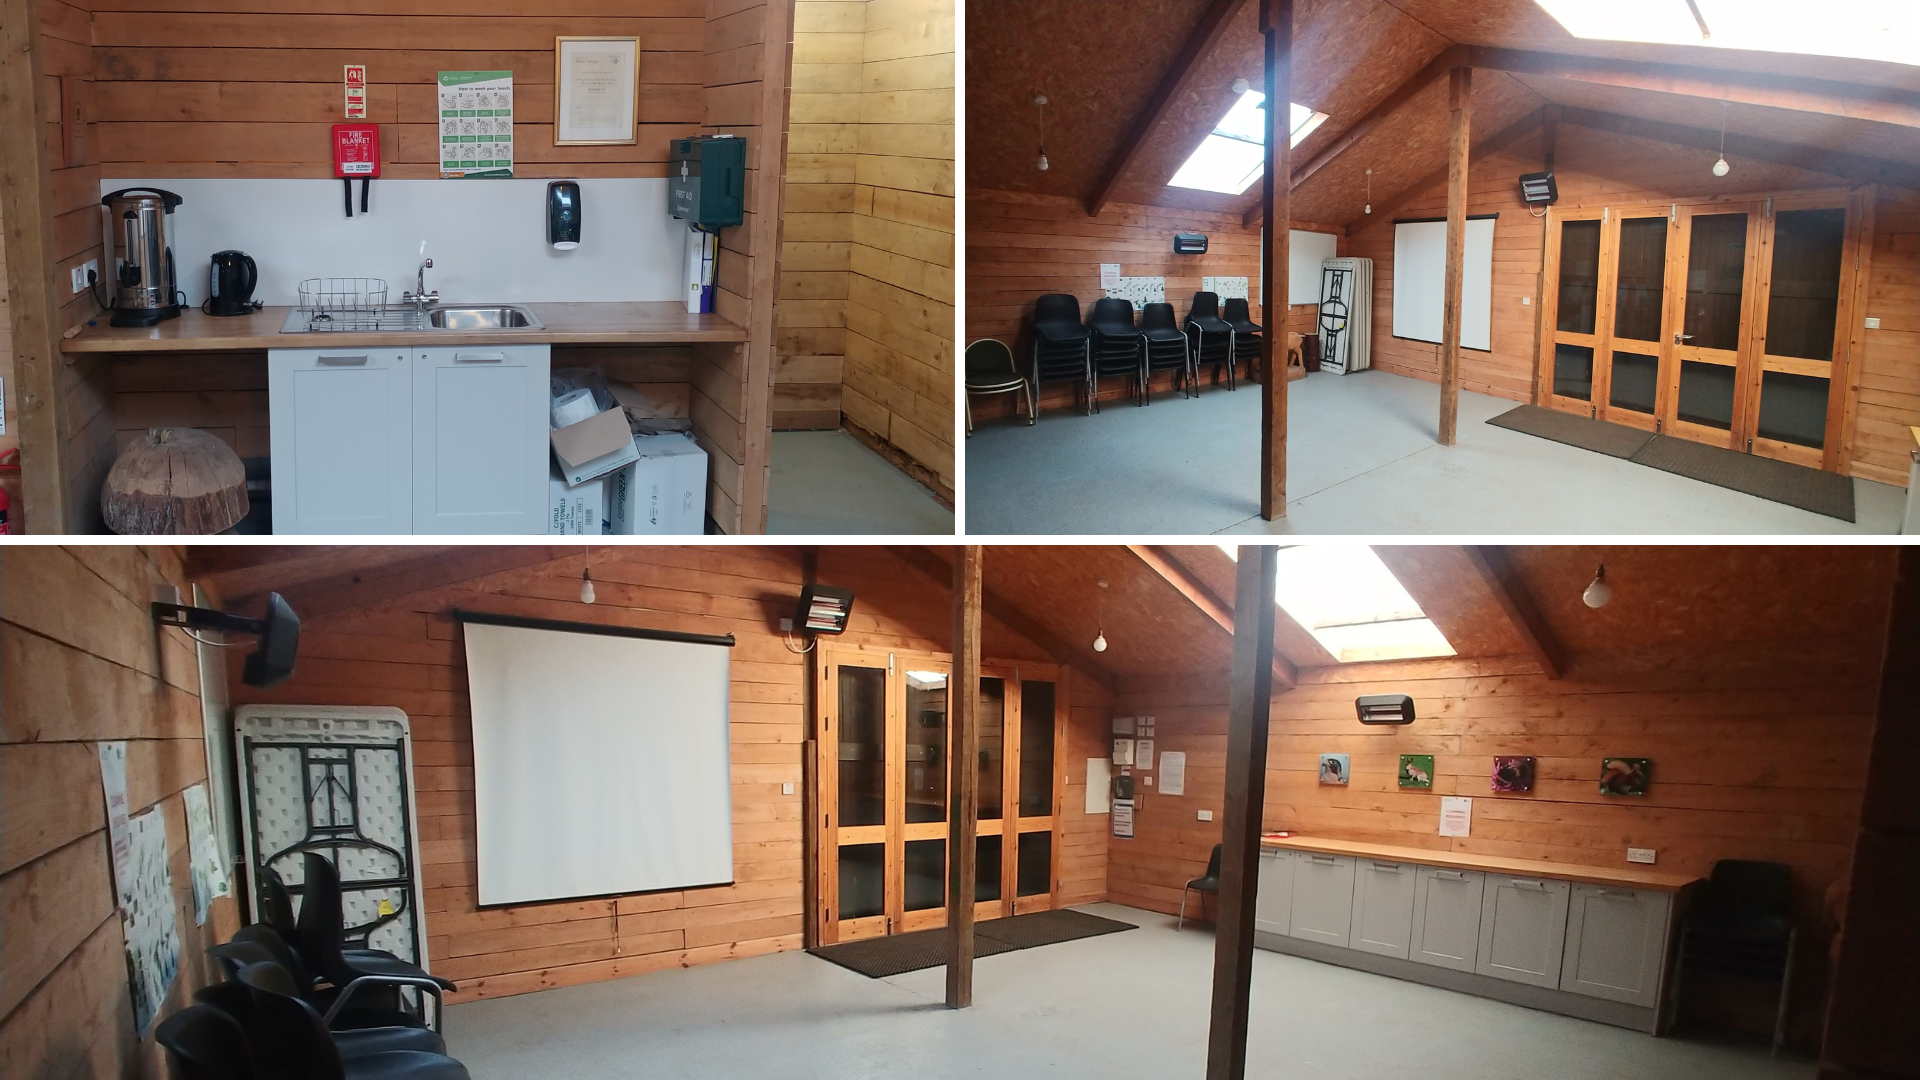 A collage of three images of the Kinnoull shed. In the top left corner is the small kitchen area with cabinets, sink, kettle and hot water urn. There is a first aid kit and fire blanket on the wall. The top right image shows the interior of the shed with skylights, glass-panelled bifolding doors, tables and chairs. The bottom image is another angle of the interior showing heaters, a projector screen and a row of kitchen cupboards with a worktop on the opposite wall. 